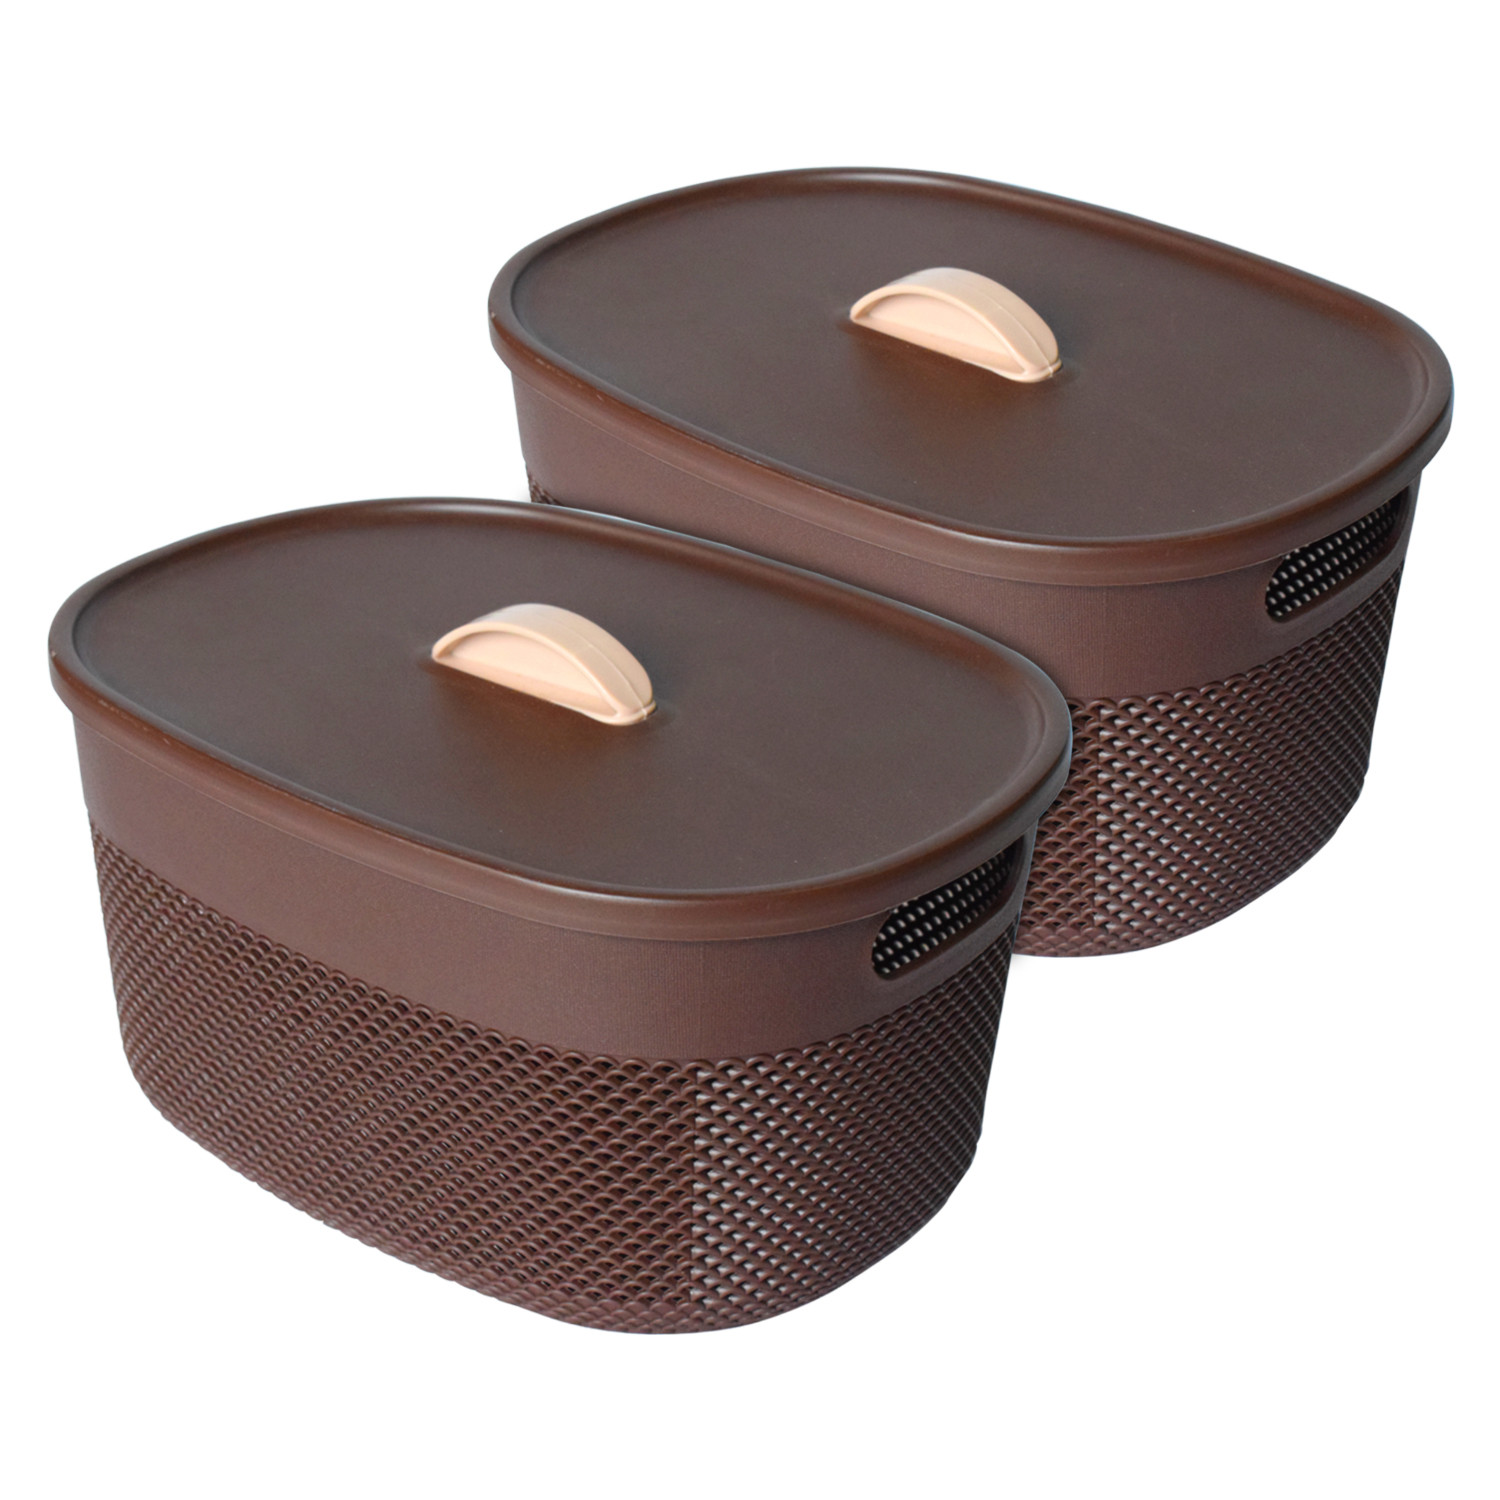 Kuber Industries Unbreakable  Medium Multipurpose Storage Baskets with lid|Design-Netted|Material-Plastic|Shape-Oval|Color-Brown